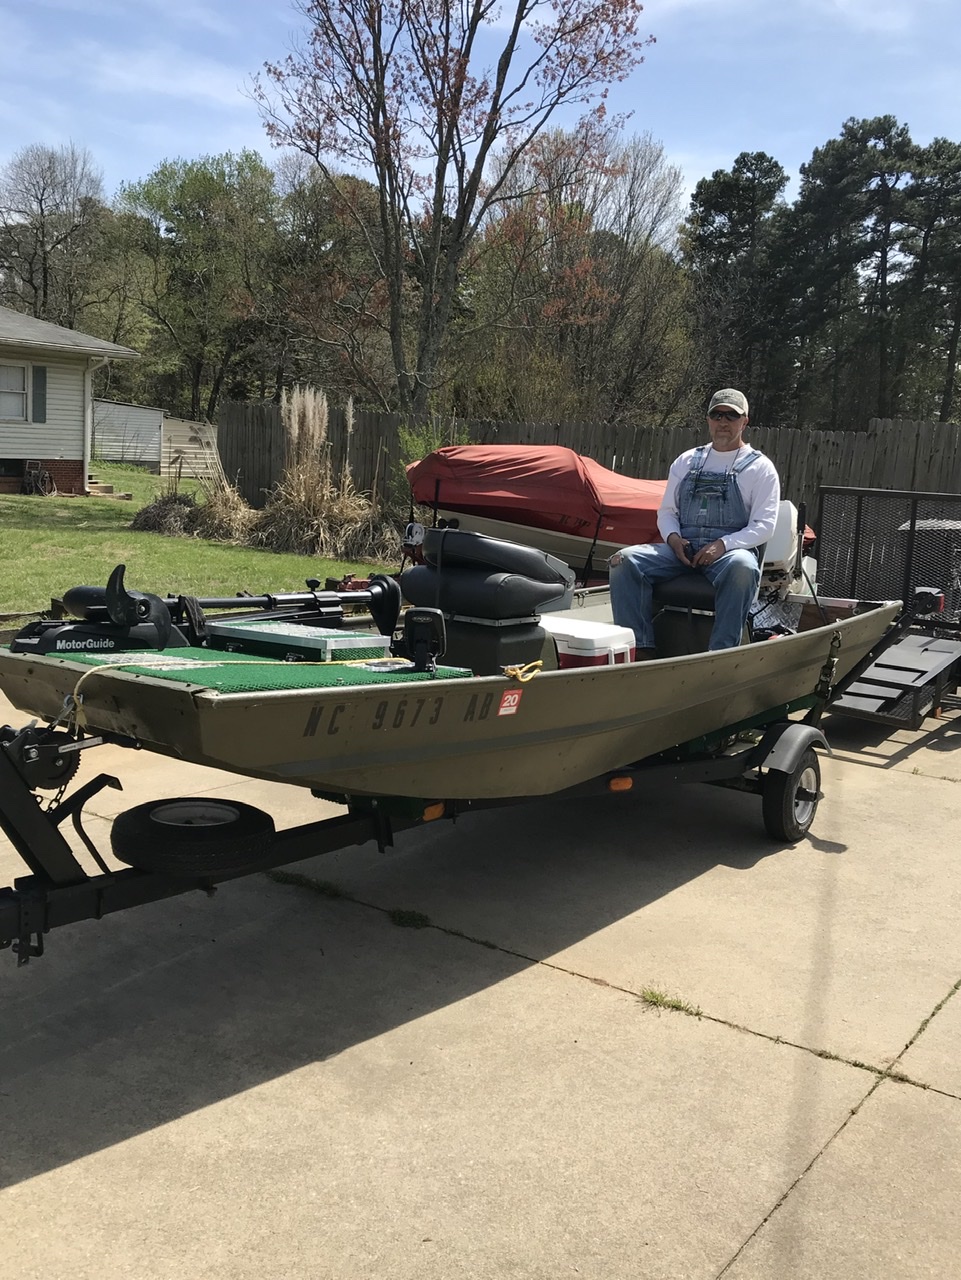 Anyone else use a cheaper boat? - Page 2 - Bass Boats, Canoes, Kayaks and  more - Bass Fishing Forums